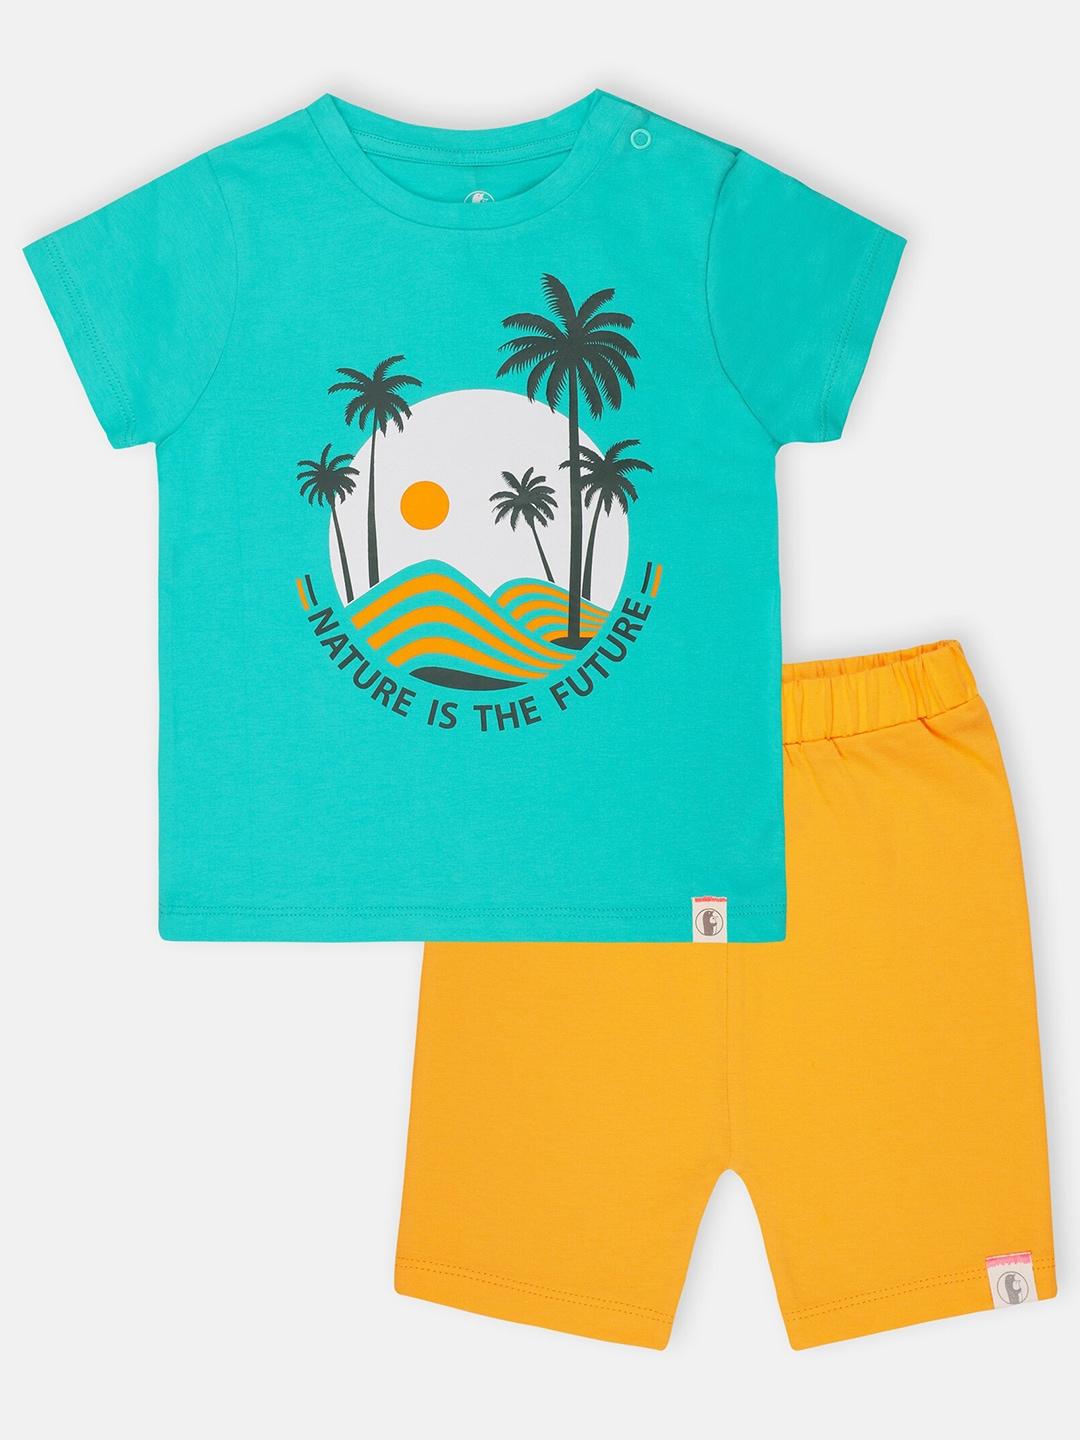 Babysafe Boys Teal Blue & Yellow Printed Pure Cotton T-shirt with Shorts